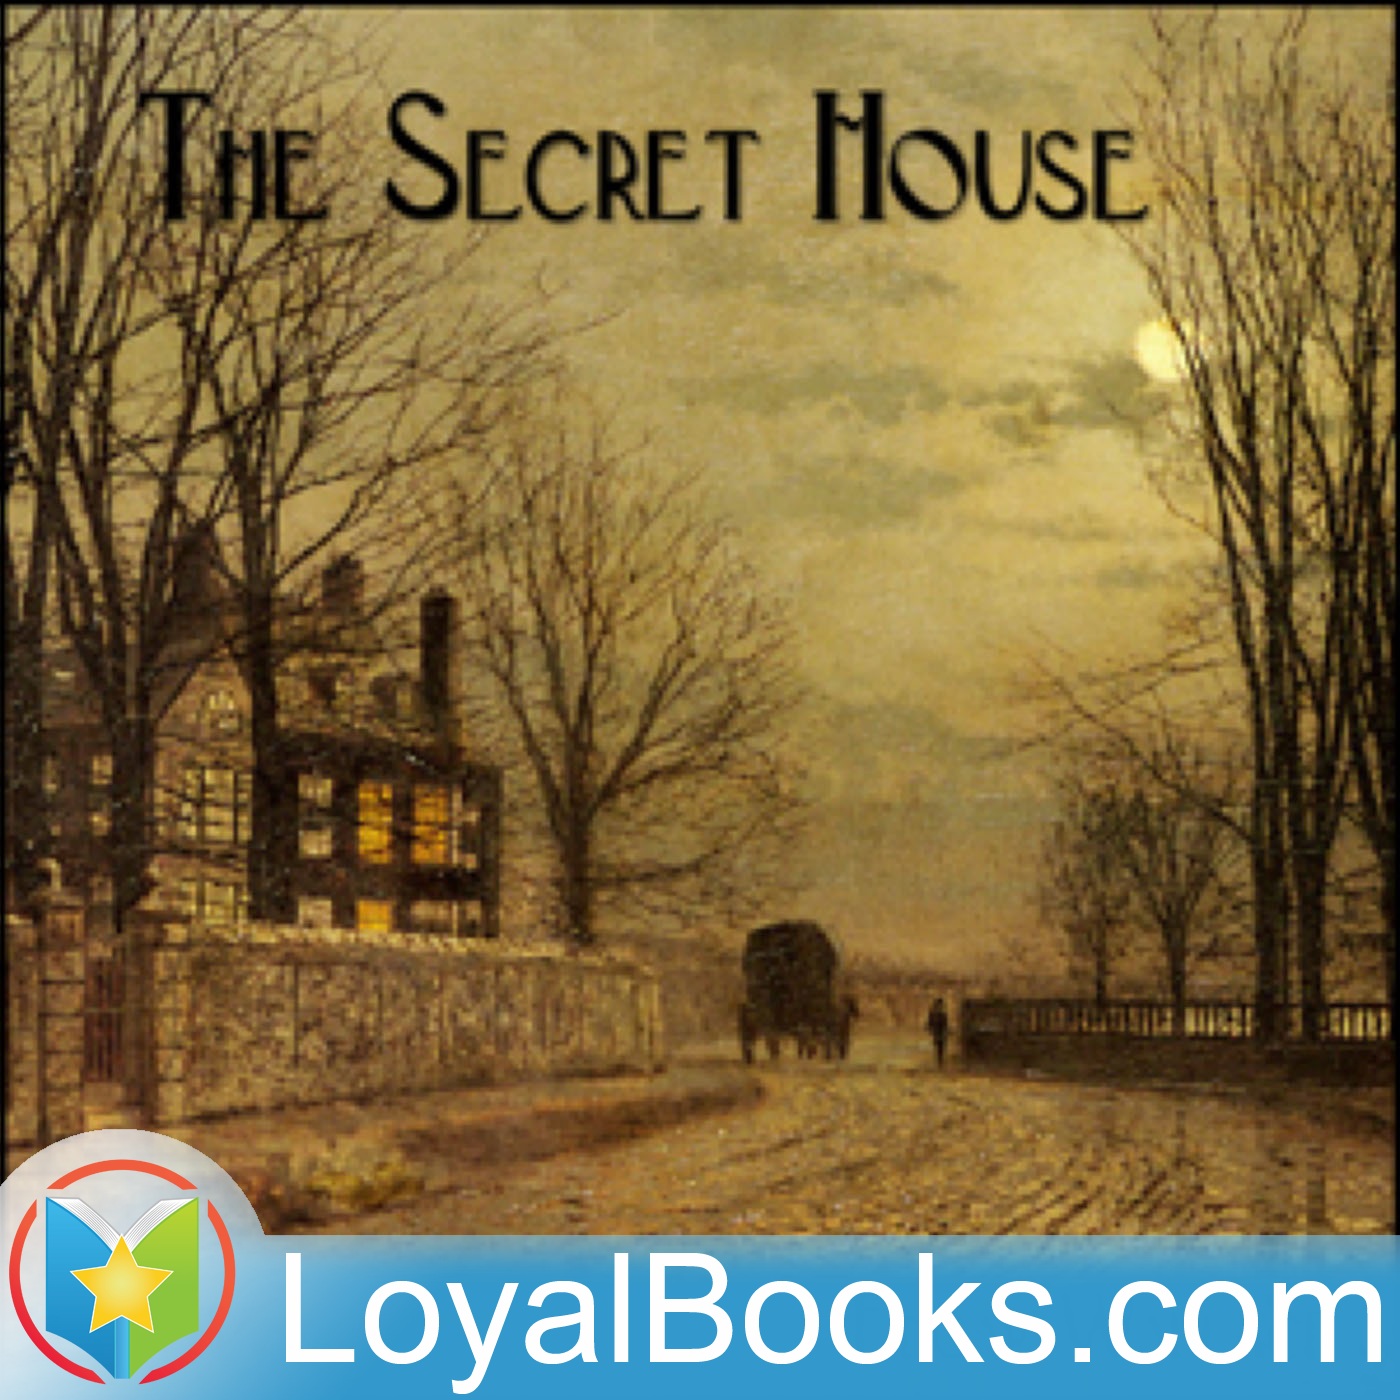 The Secret House by Edgar Wallace